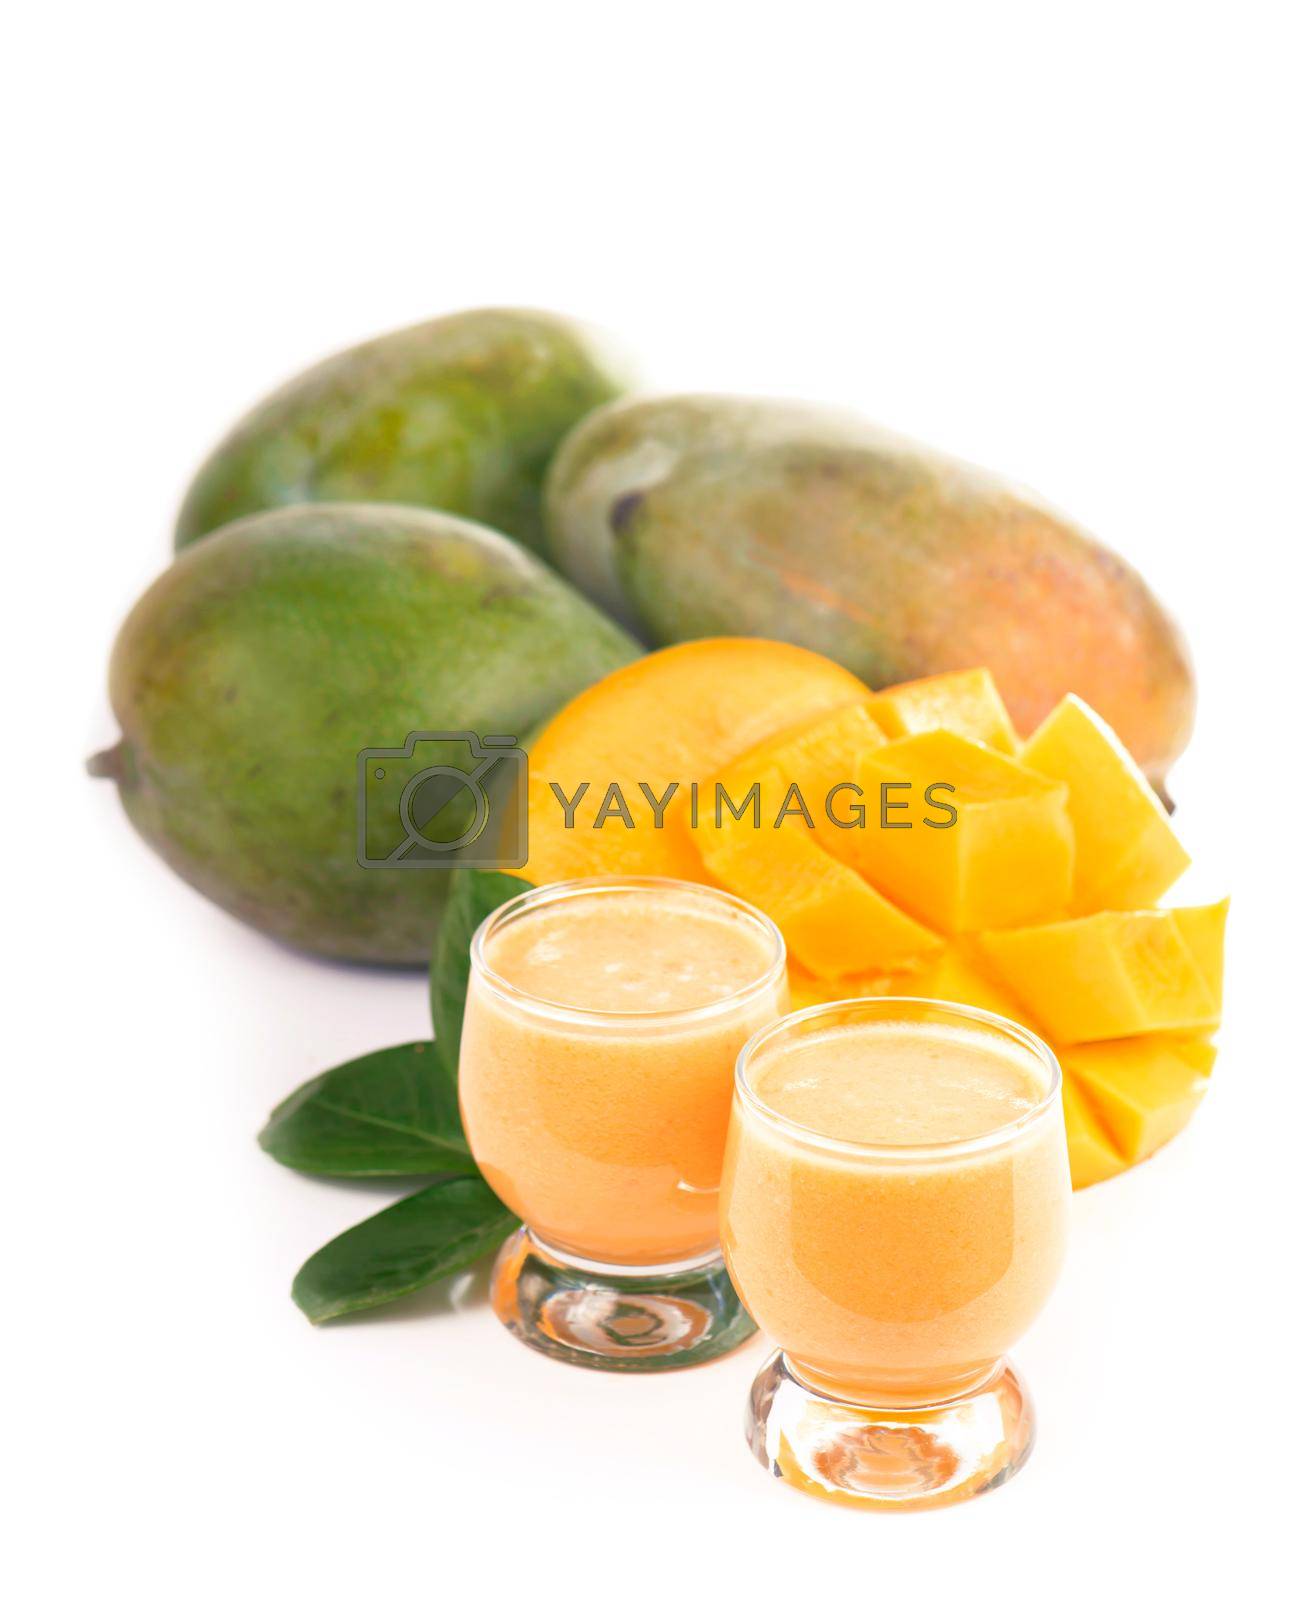 Royalty free image of exotic juicy mango fruits and two glasses of fresh natural mango juice isolated on white background by aprilphoto